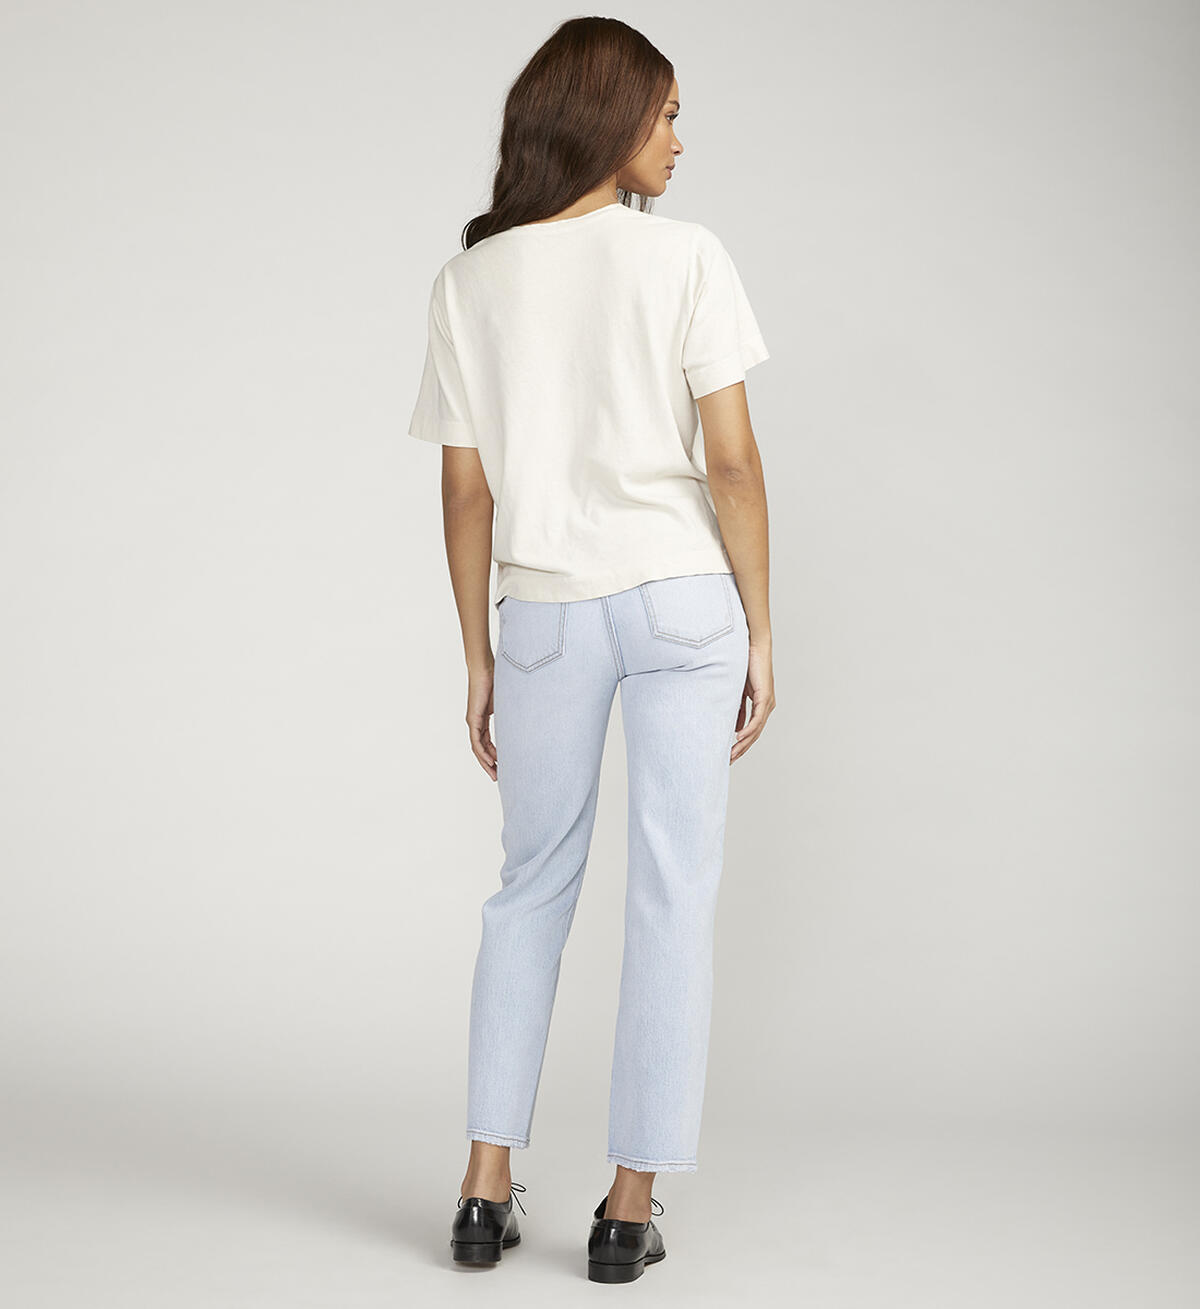 SILVER JEANS Highly Desirable Straight Leg Jeans